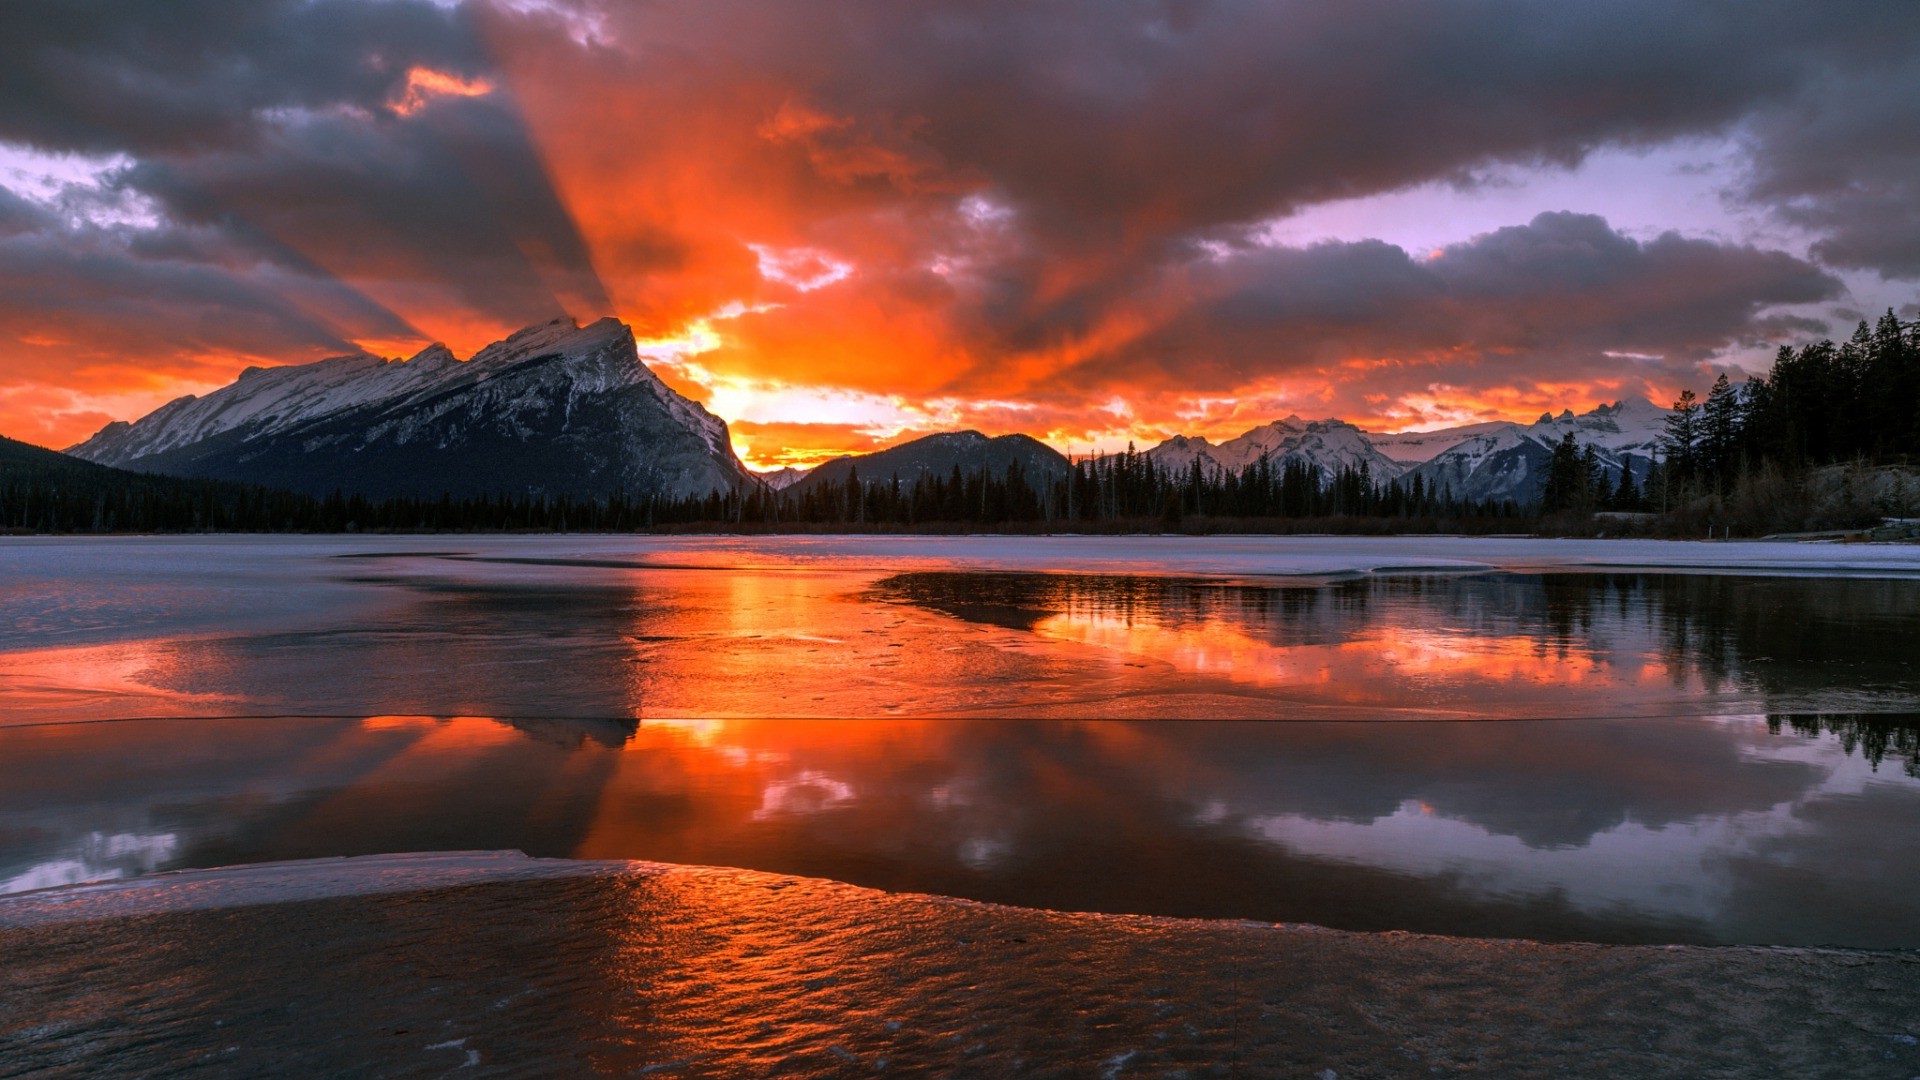 nature, Landscape, Mountain, Canada, Alberta, Snow, Winter, Trees, Forest, Water, Lake, Sun, Clouds, Pine Trees, Frozen Lake, Ice, Sunset, Snowy Peak, Reflection Wallpaper